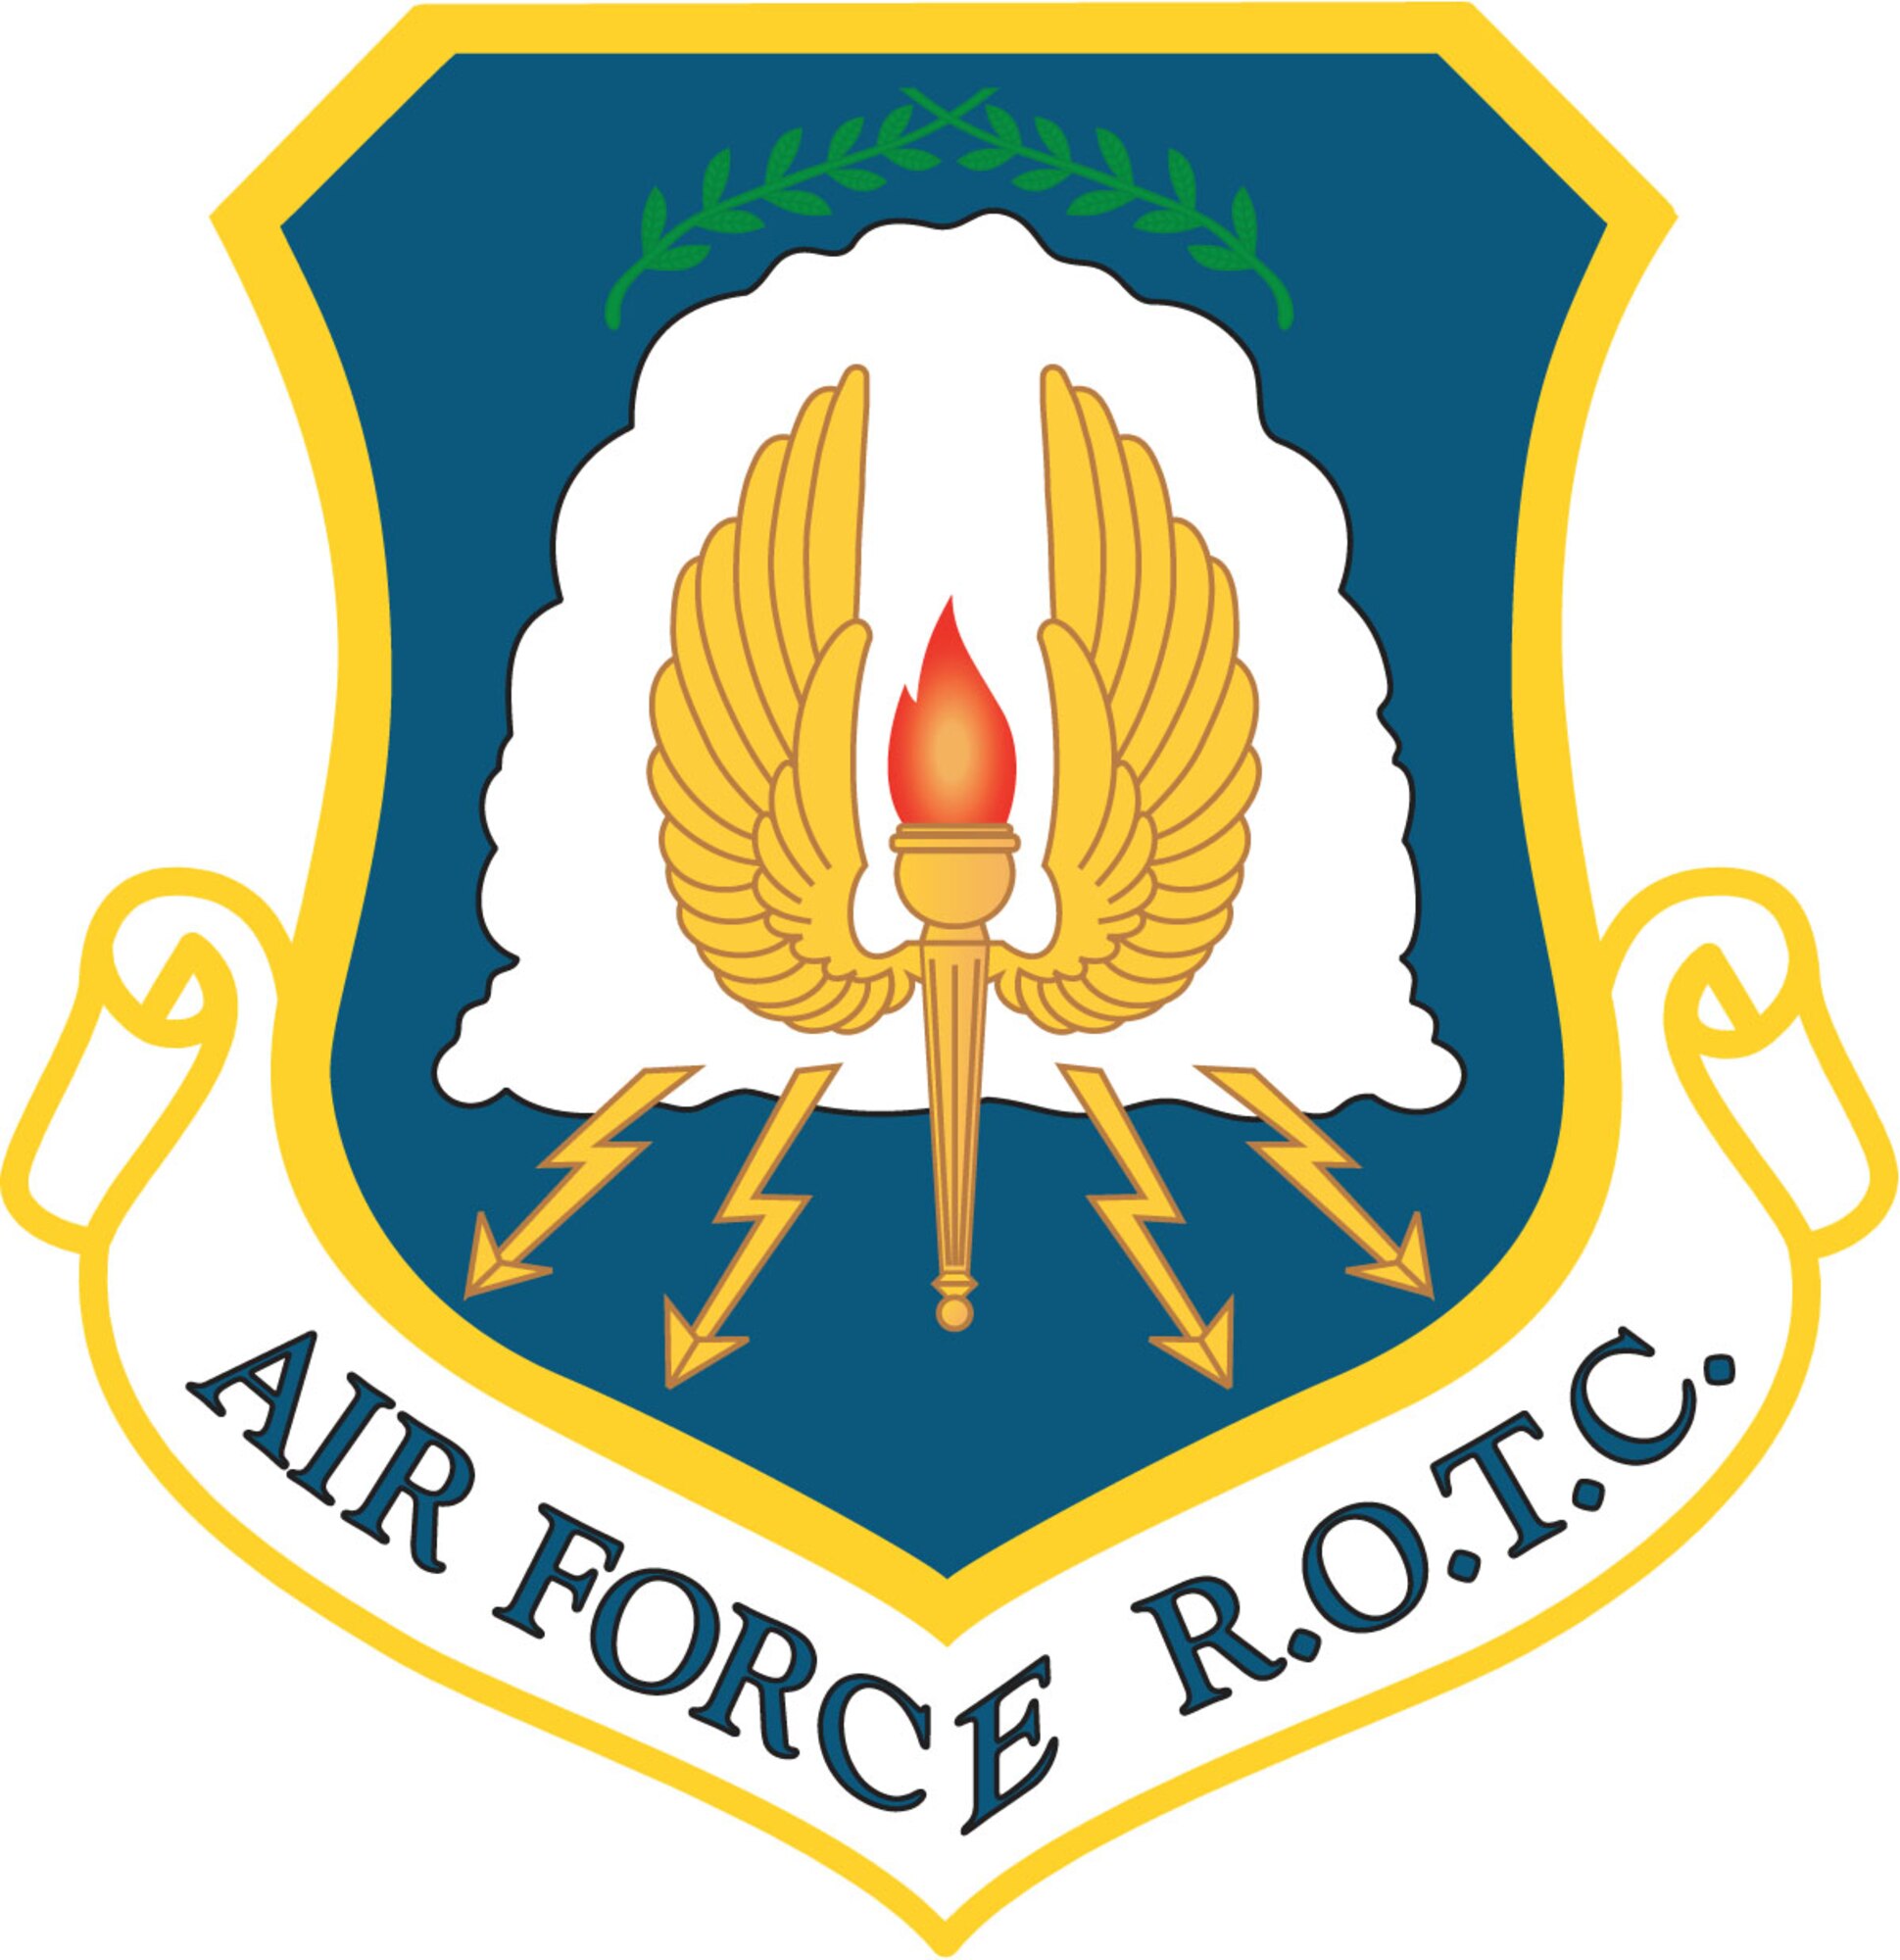 Air Force Reserve Officers' Training Corps